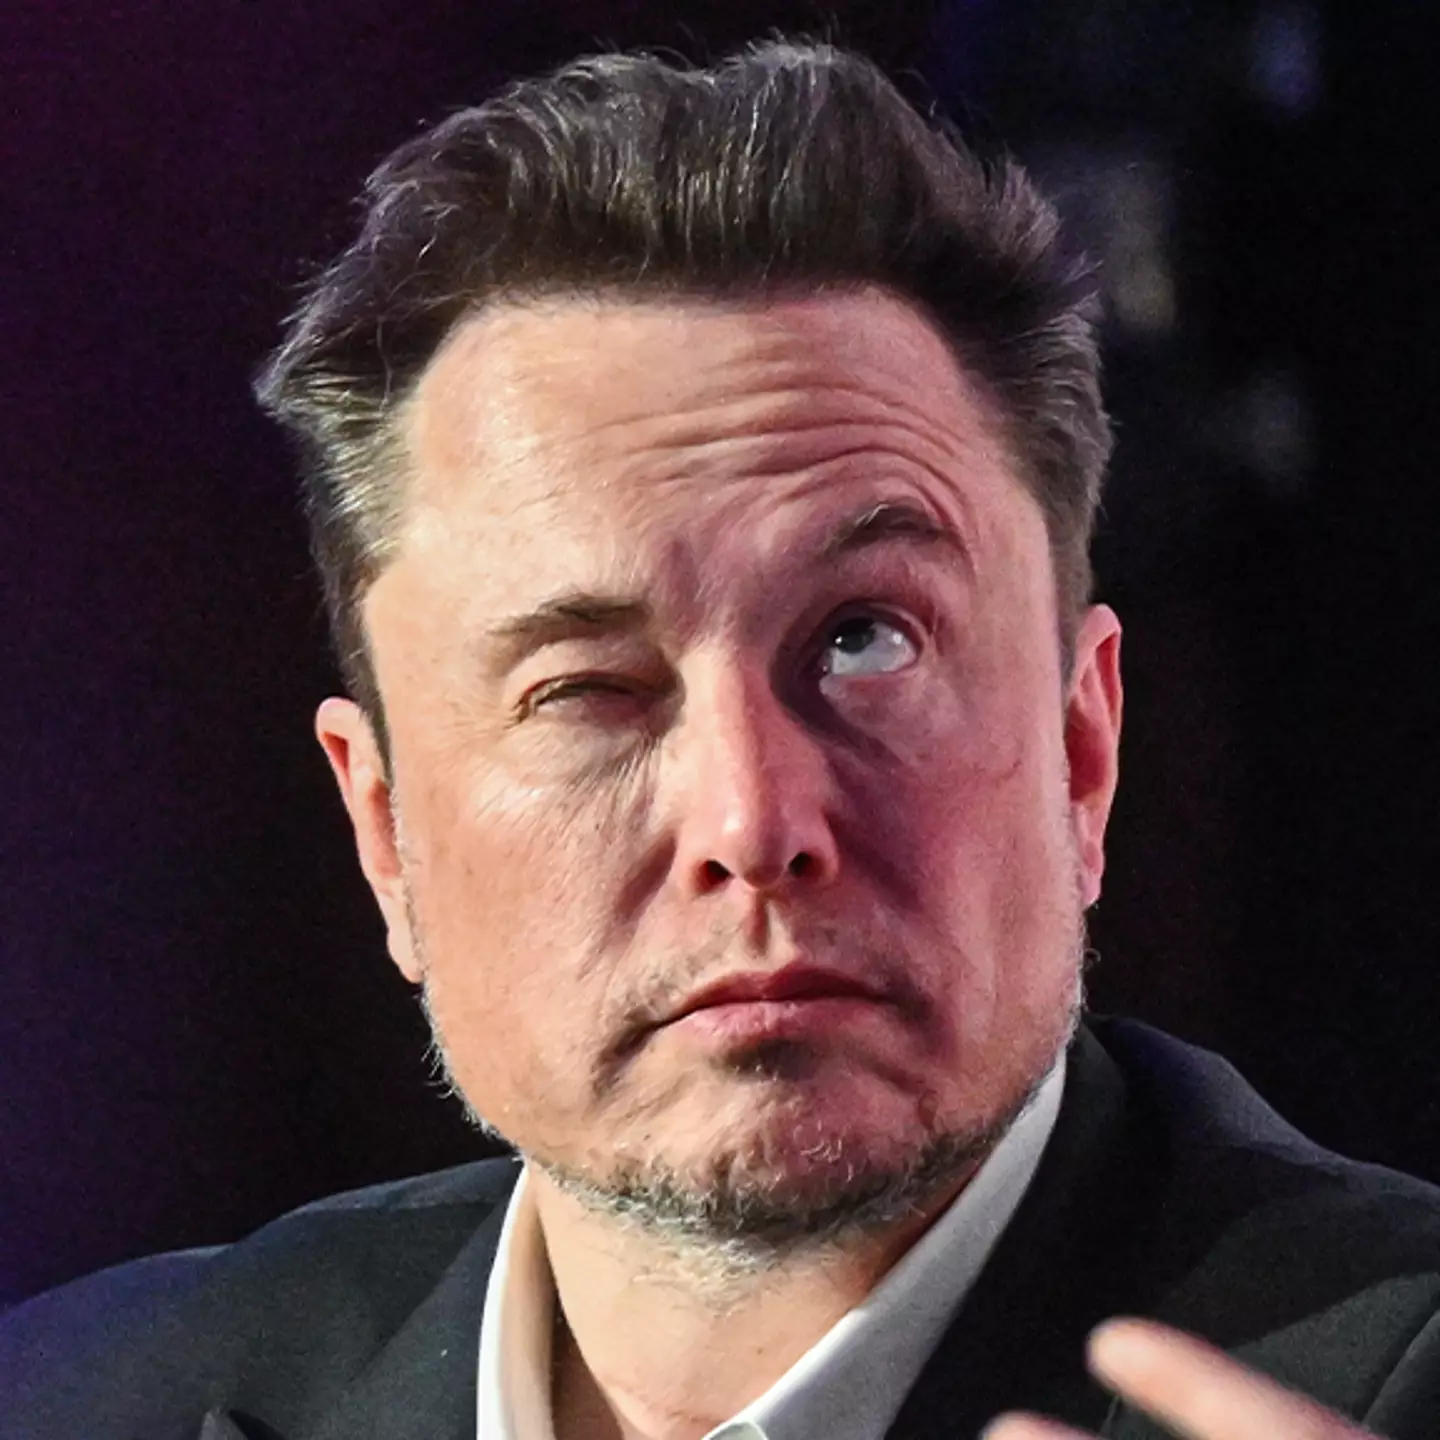 How soon Elon Musk and Jeff Bezos would run out of money if they spent $1 million a day